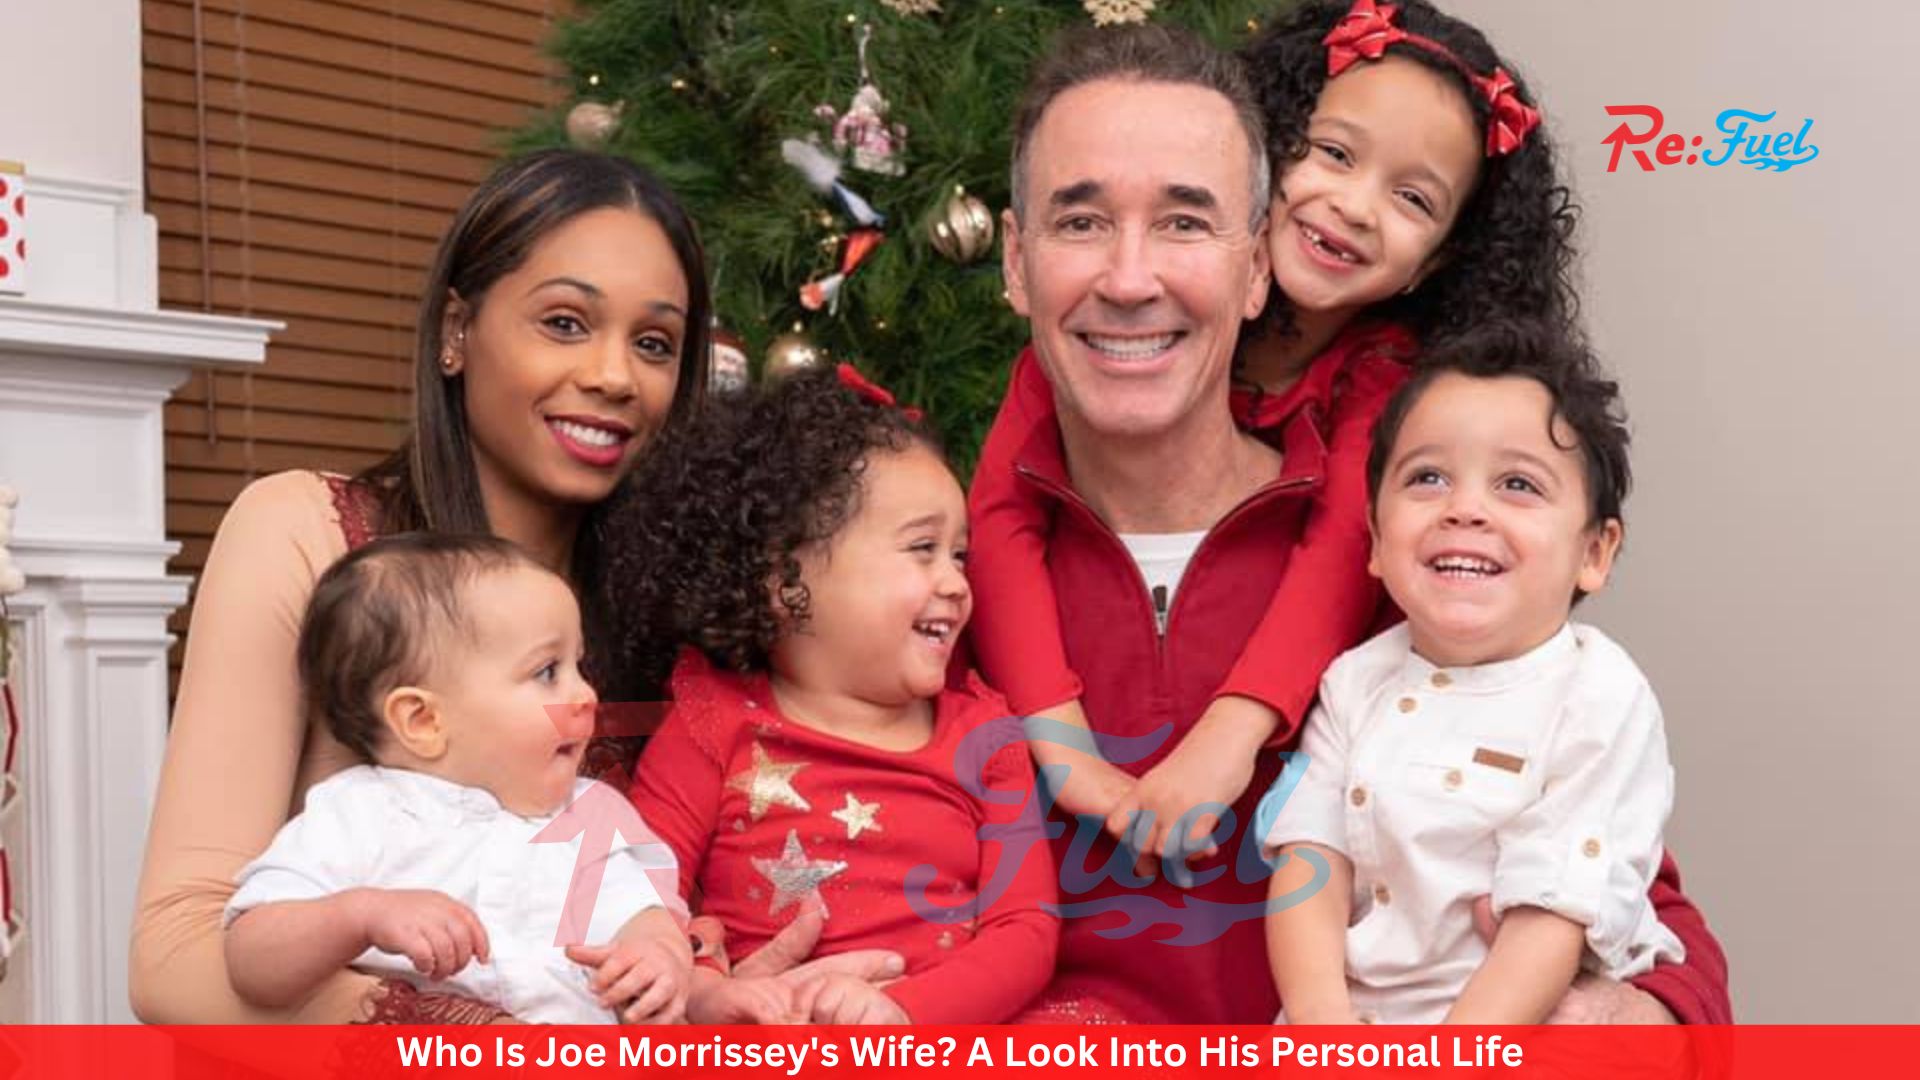 Who Is Joe Morrissey's Wife? A Look Into His Personal Life